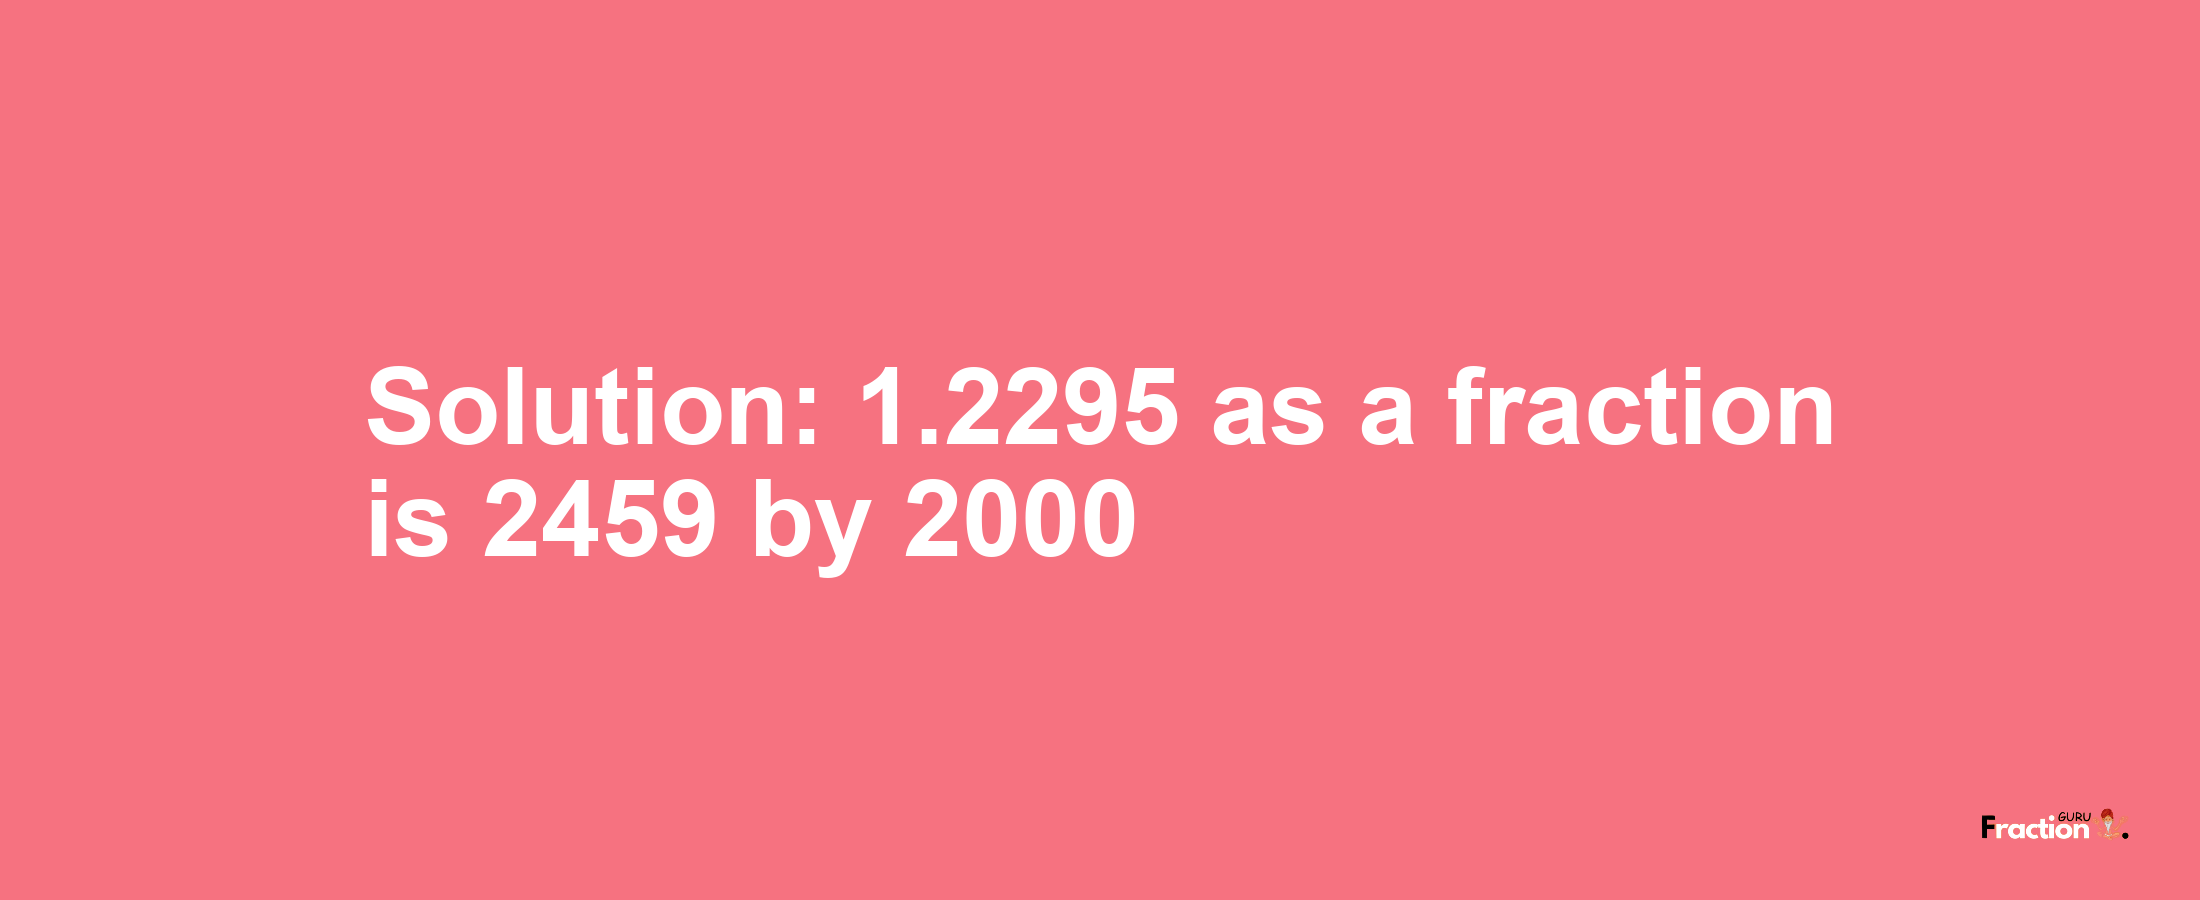 Solution:1.2295 as a fraction is 2459/2000